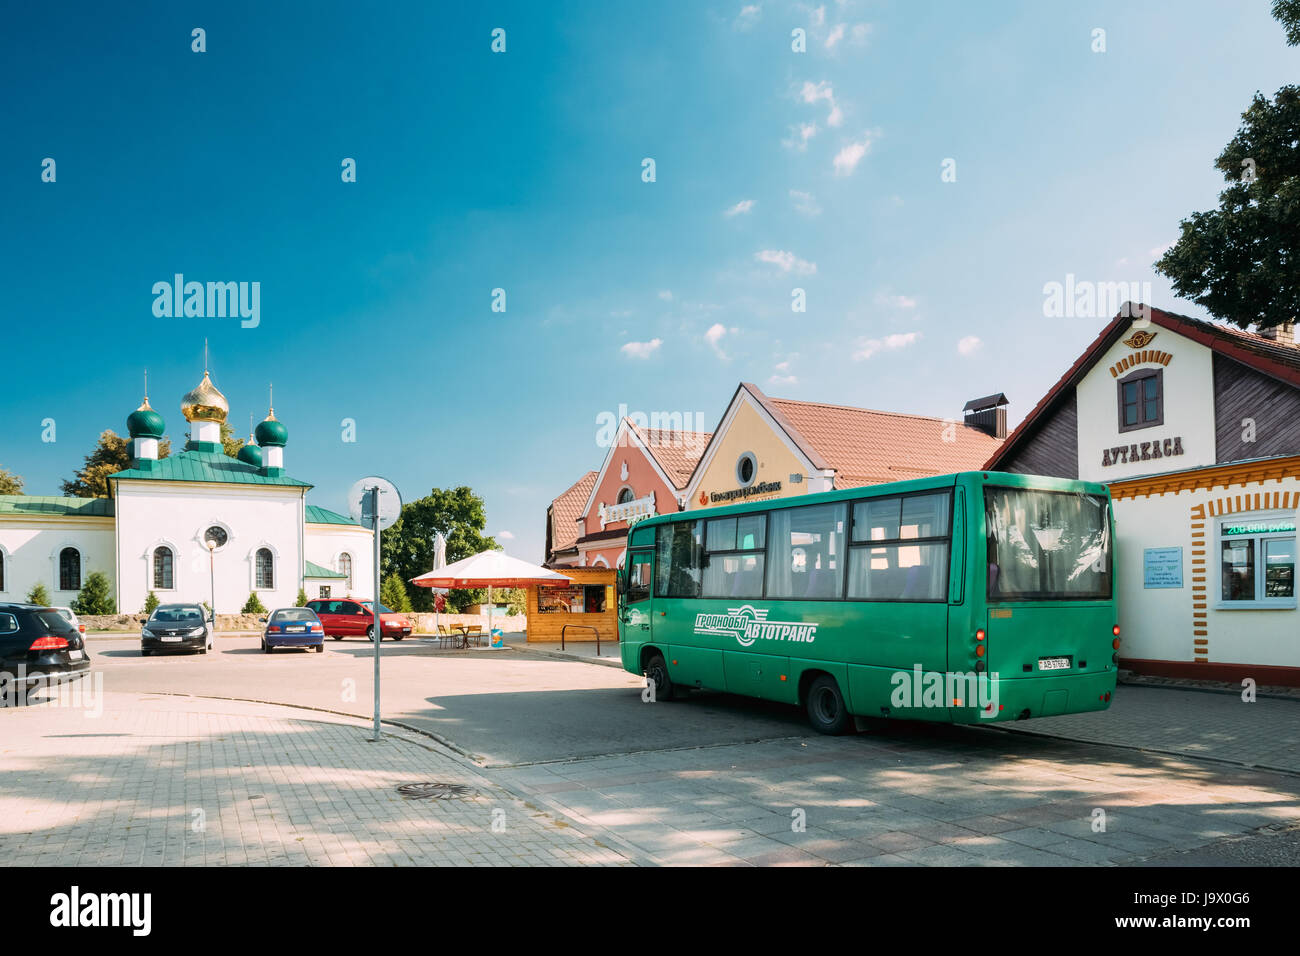 Mir, Belarus - September 2, 2016: Public Bus Car Parked Near Bus Station And Old Orthodox Church Of The Holy Trinity In Mir, Belarus. Famous Landmark  Stock Photo